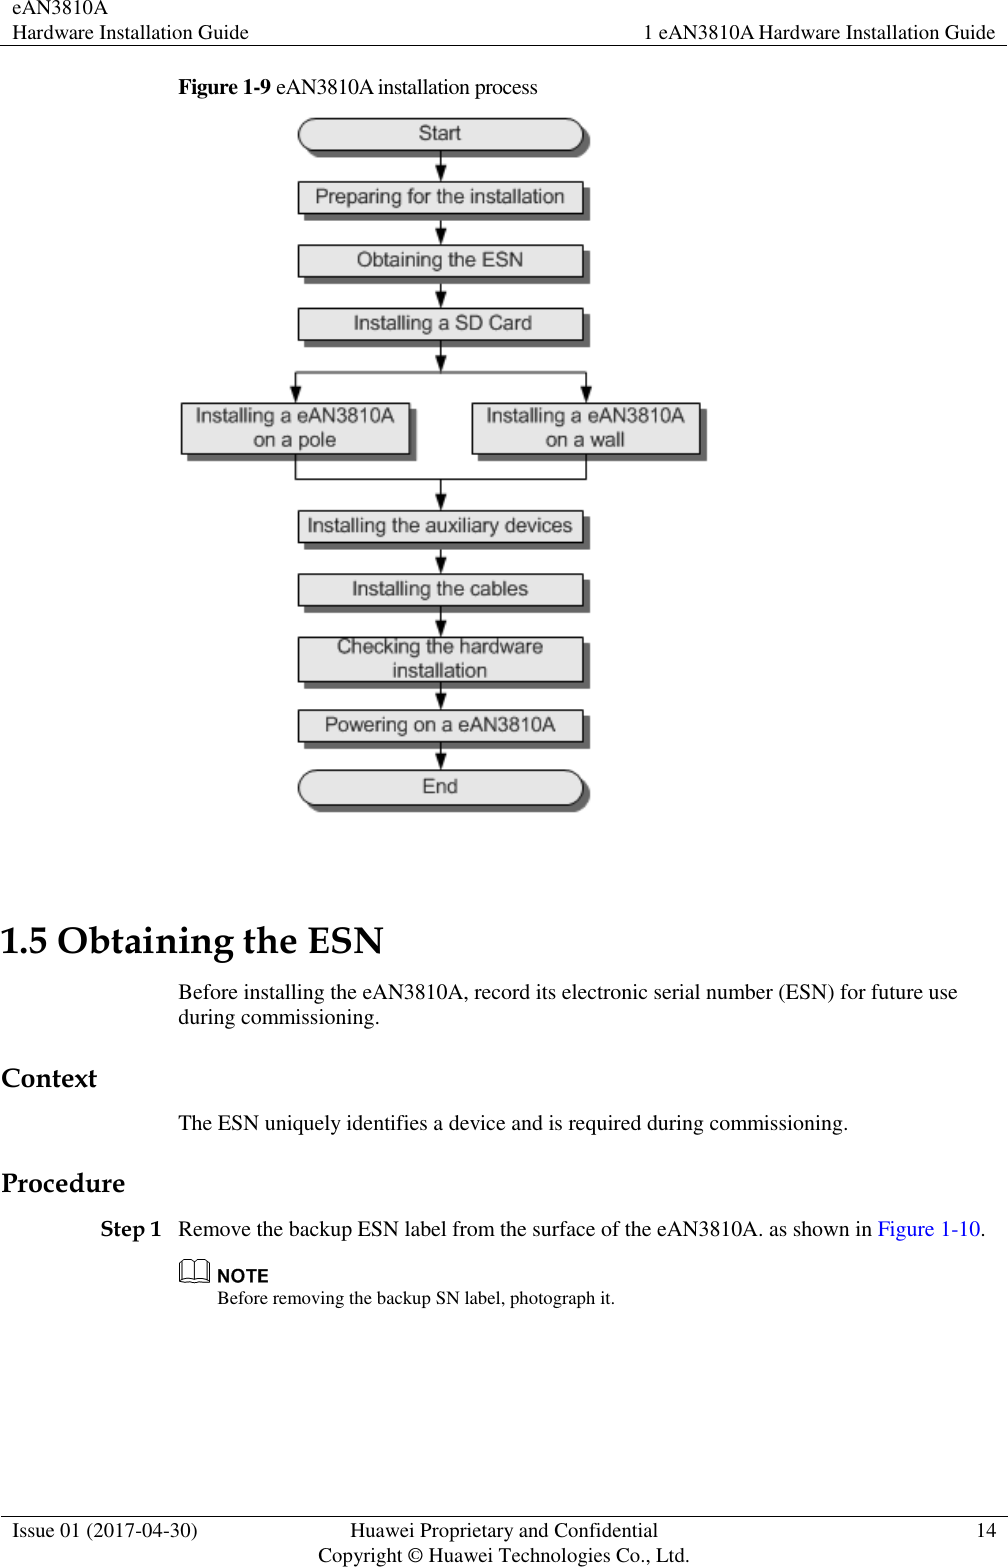 eAN3810A   Hardware Installation Guide 1 eAN3810A Hardware Installation Guide  Issue 01 (2017-04-30) Huawei Proprietary and Confidential                                     Copyright © Huawei Technologies Co., Ltd. 14  Figure 1-9 eAN3810A installation process   1.5 Obtaining the ESN Before installing the eAN3810A, record its electronic serial number (ESN) for future use during commissioning. Context The ESN uniquely identifies a device and is required during commissioning. Procedure Step 1 Remove the backup ESN label from the surface of the eAN3810A. as shown in Figure 1-10.  Before removing the backup SN label, photograph it.     